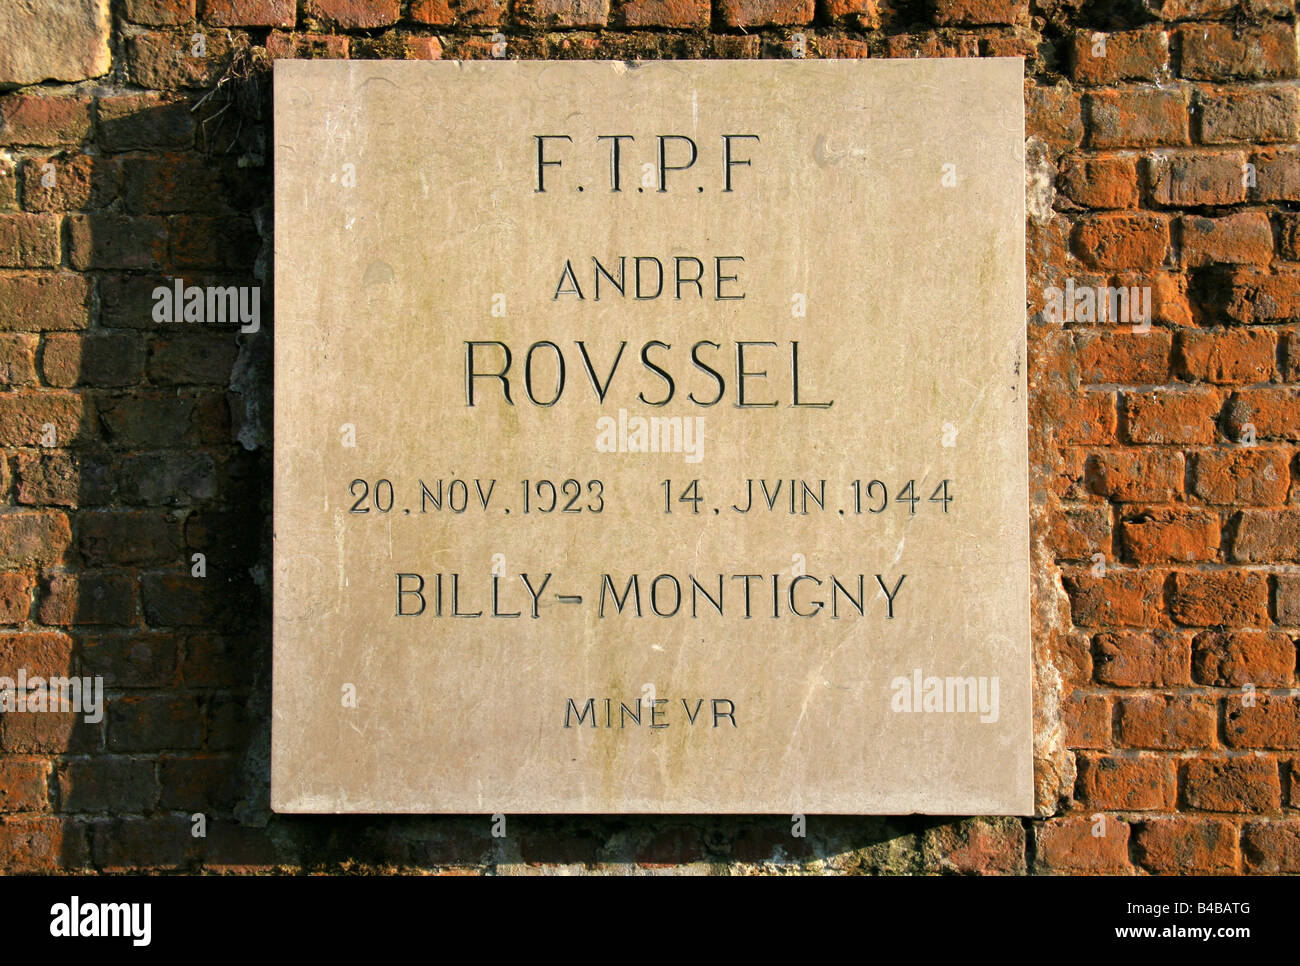 A memorial plaque to commemorate one of over 200 resistance fighters executed in the Citadel, Arras, France during World War Two Stock Photo